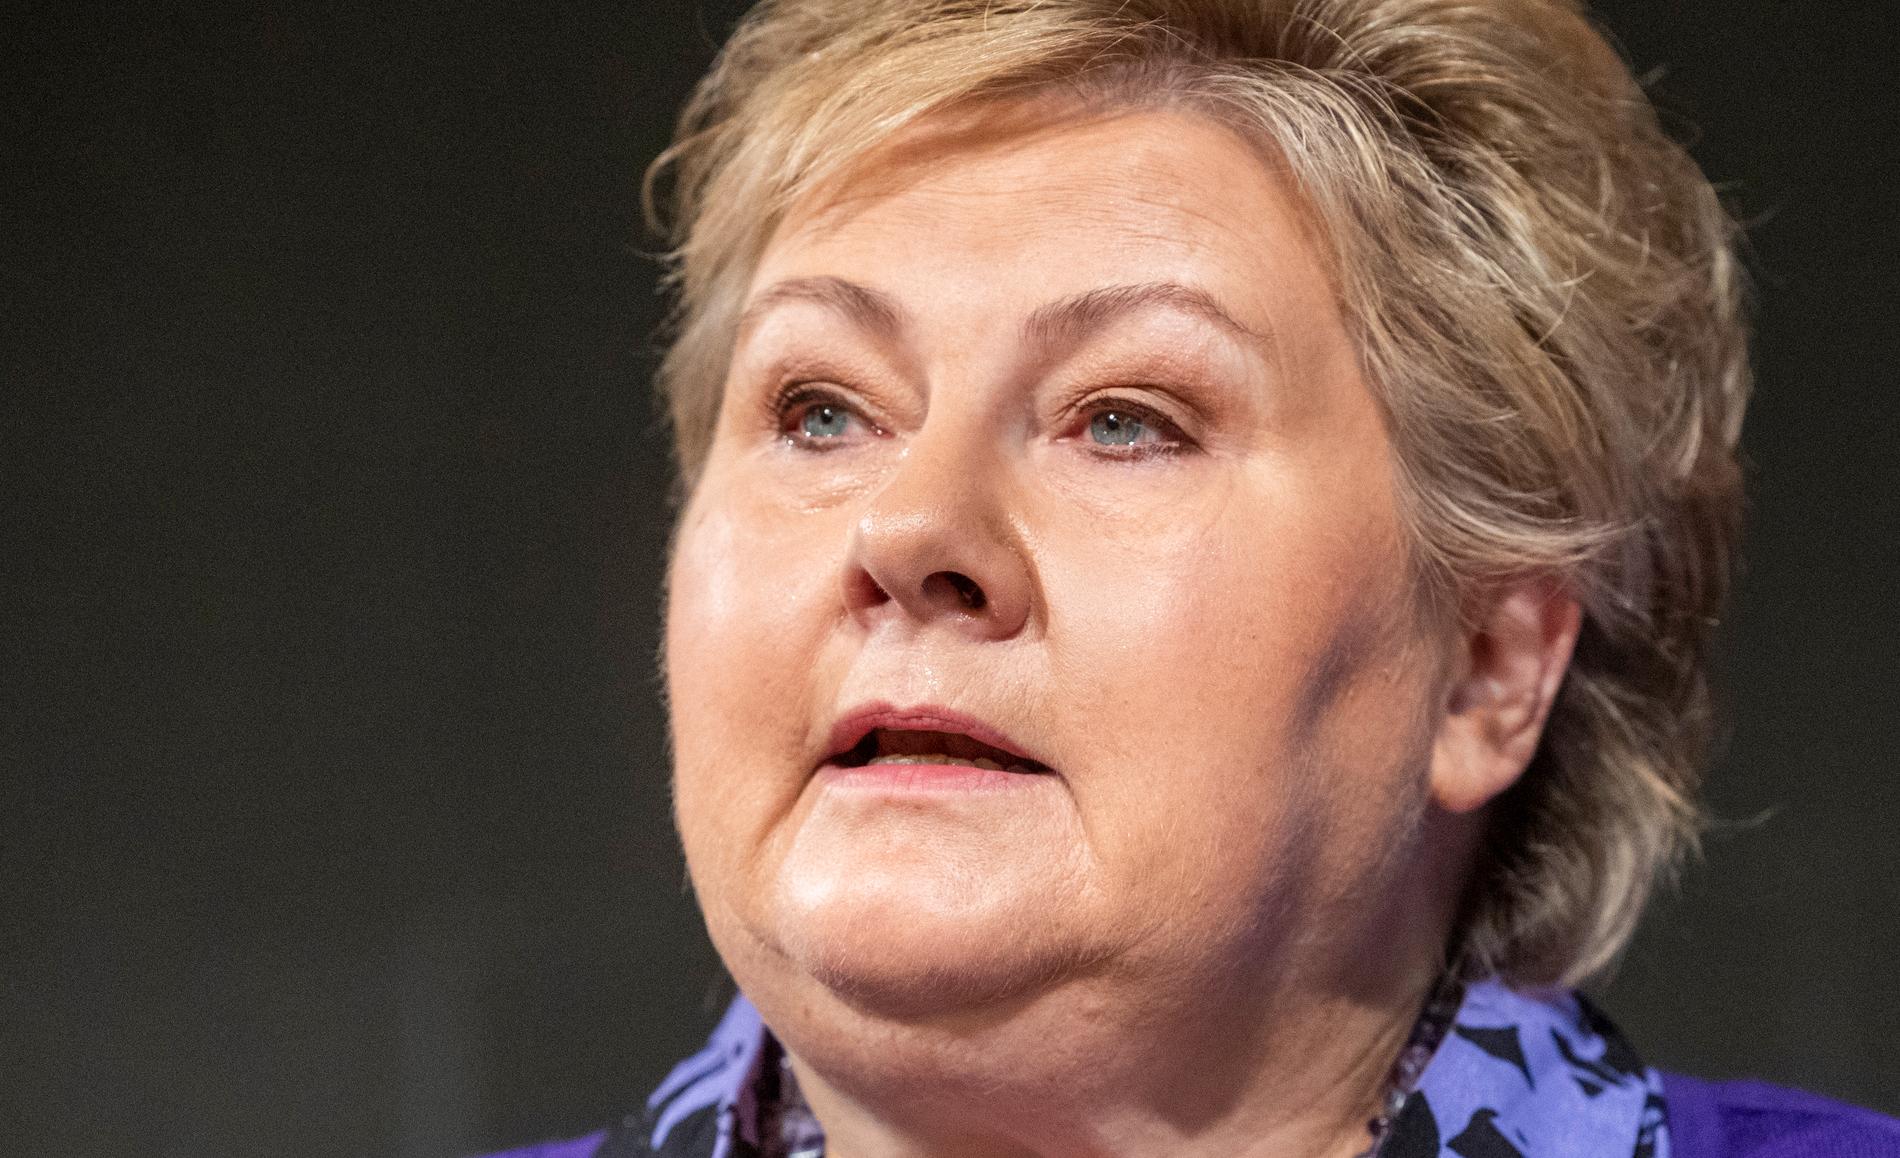 DID NOT UNDERSTAND: Erna Solberg did not understand that Finansavisen's article contained new information.